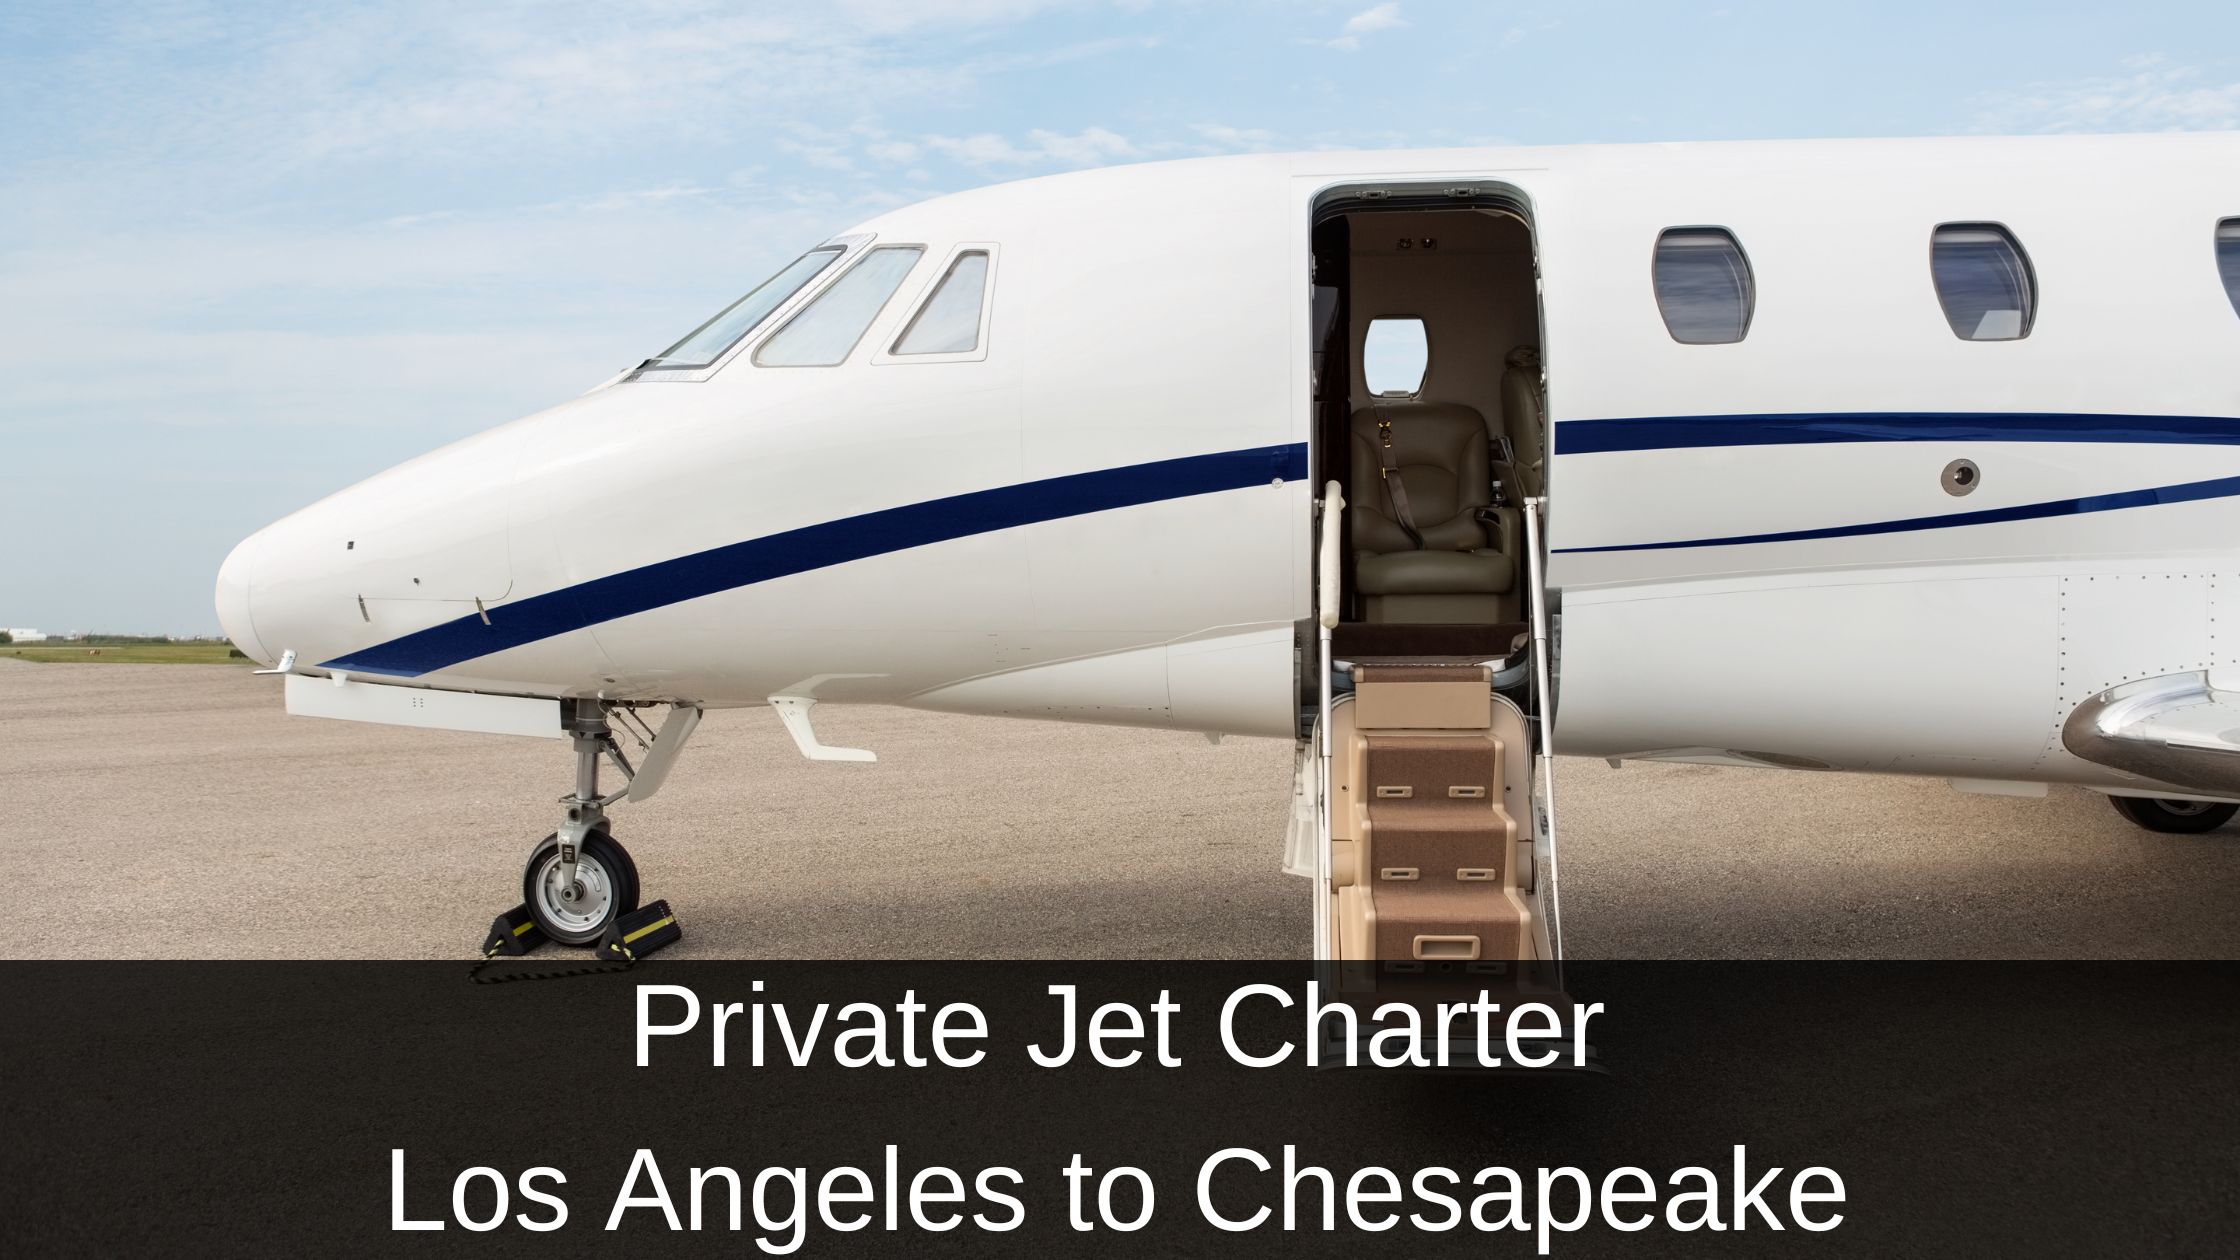 Private Jet Charter Los Angeles to Chesapeake